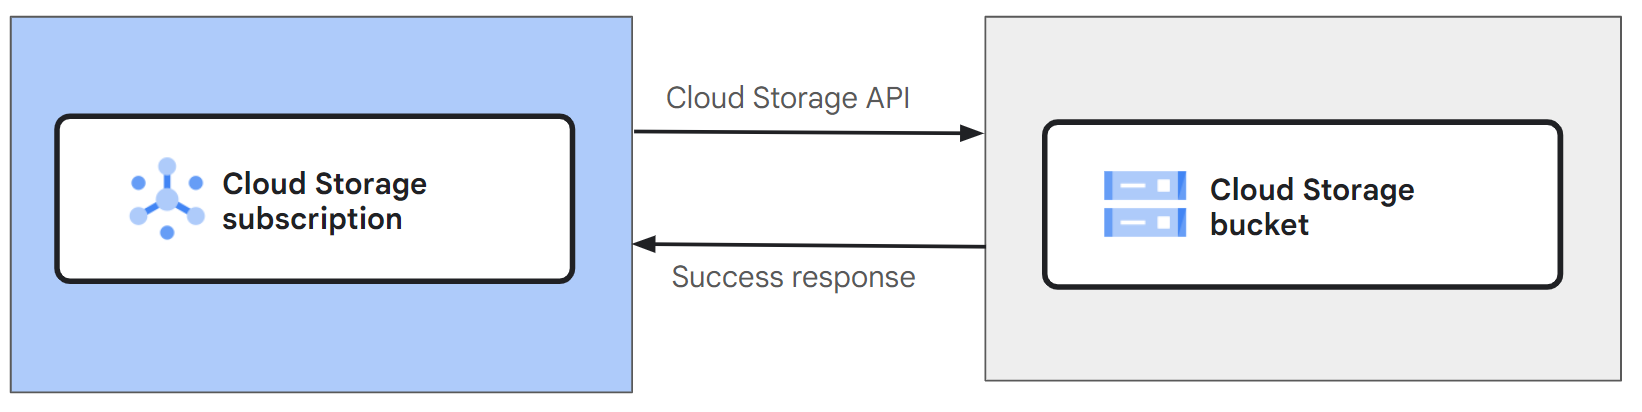 Flow of messages for a Cloud Storage subscription